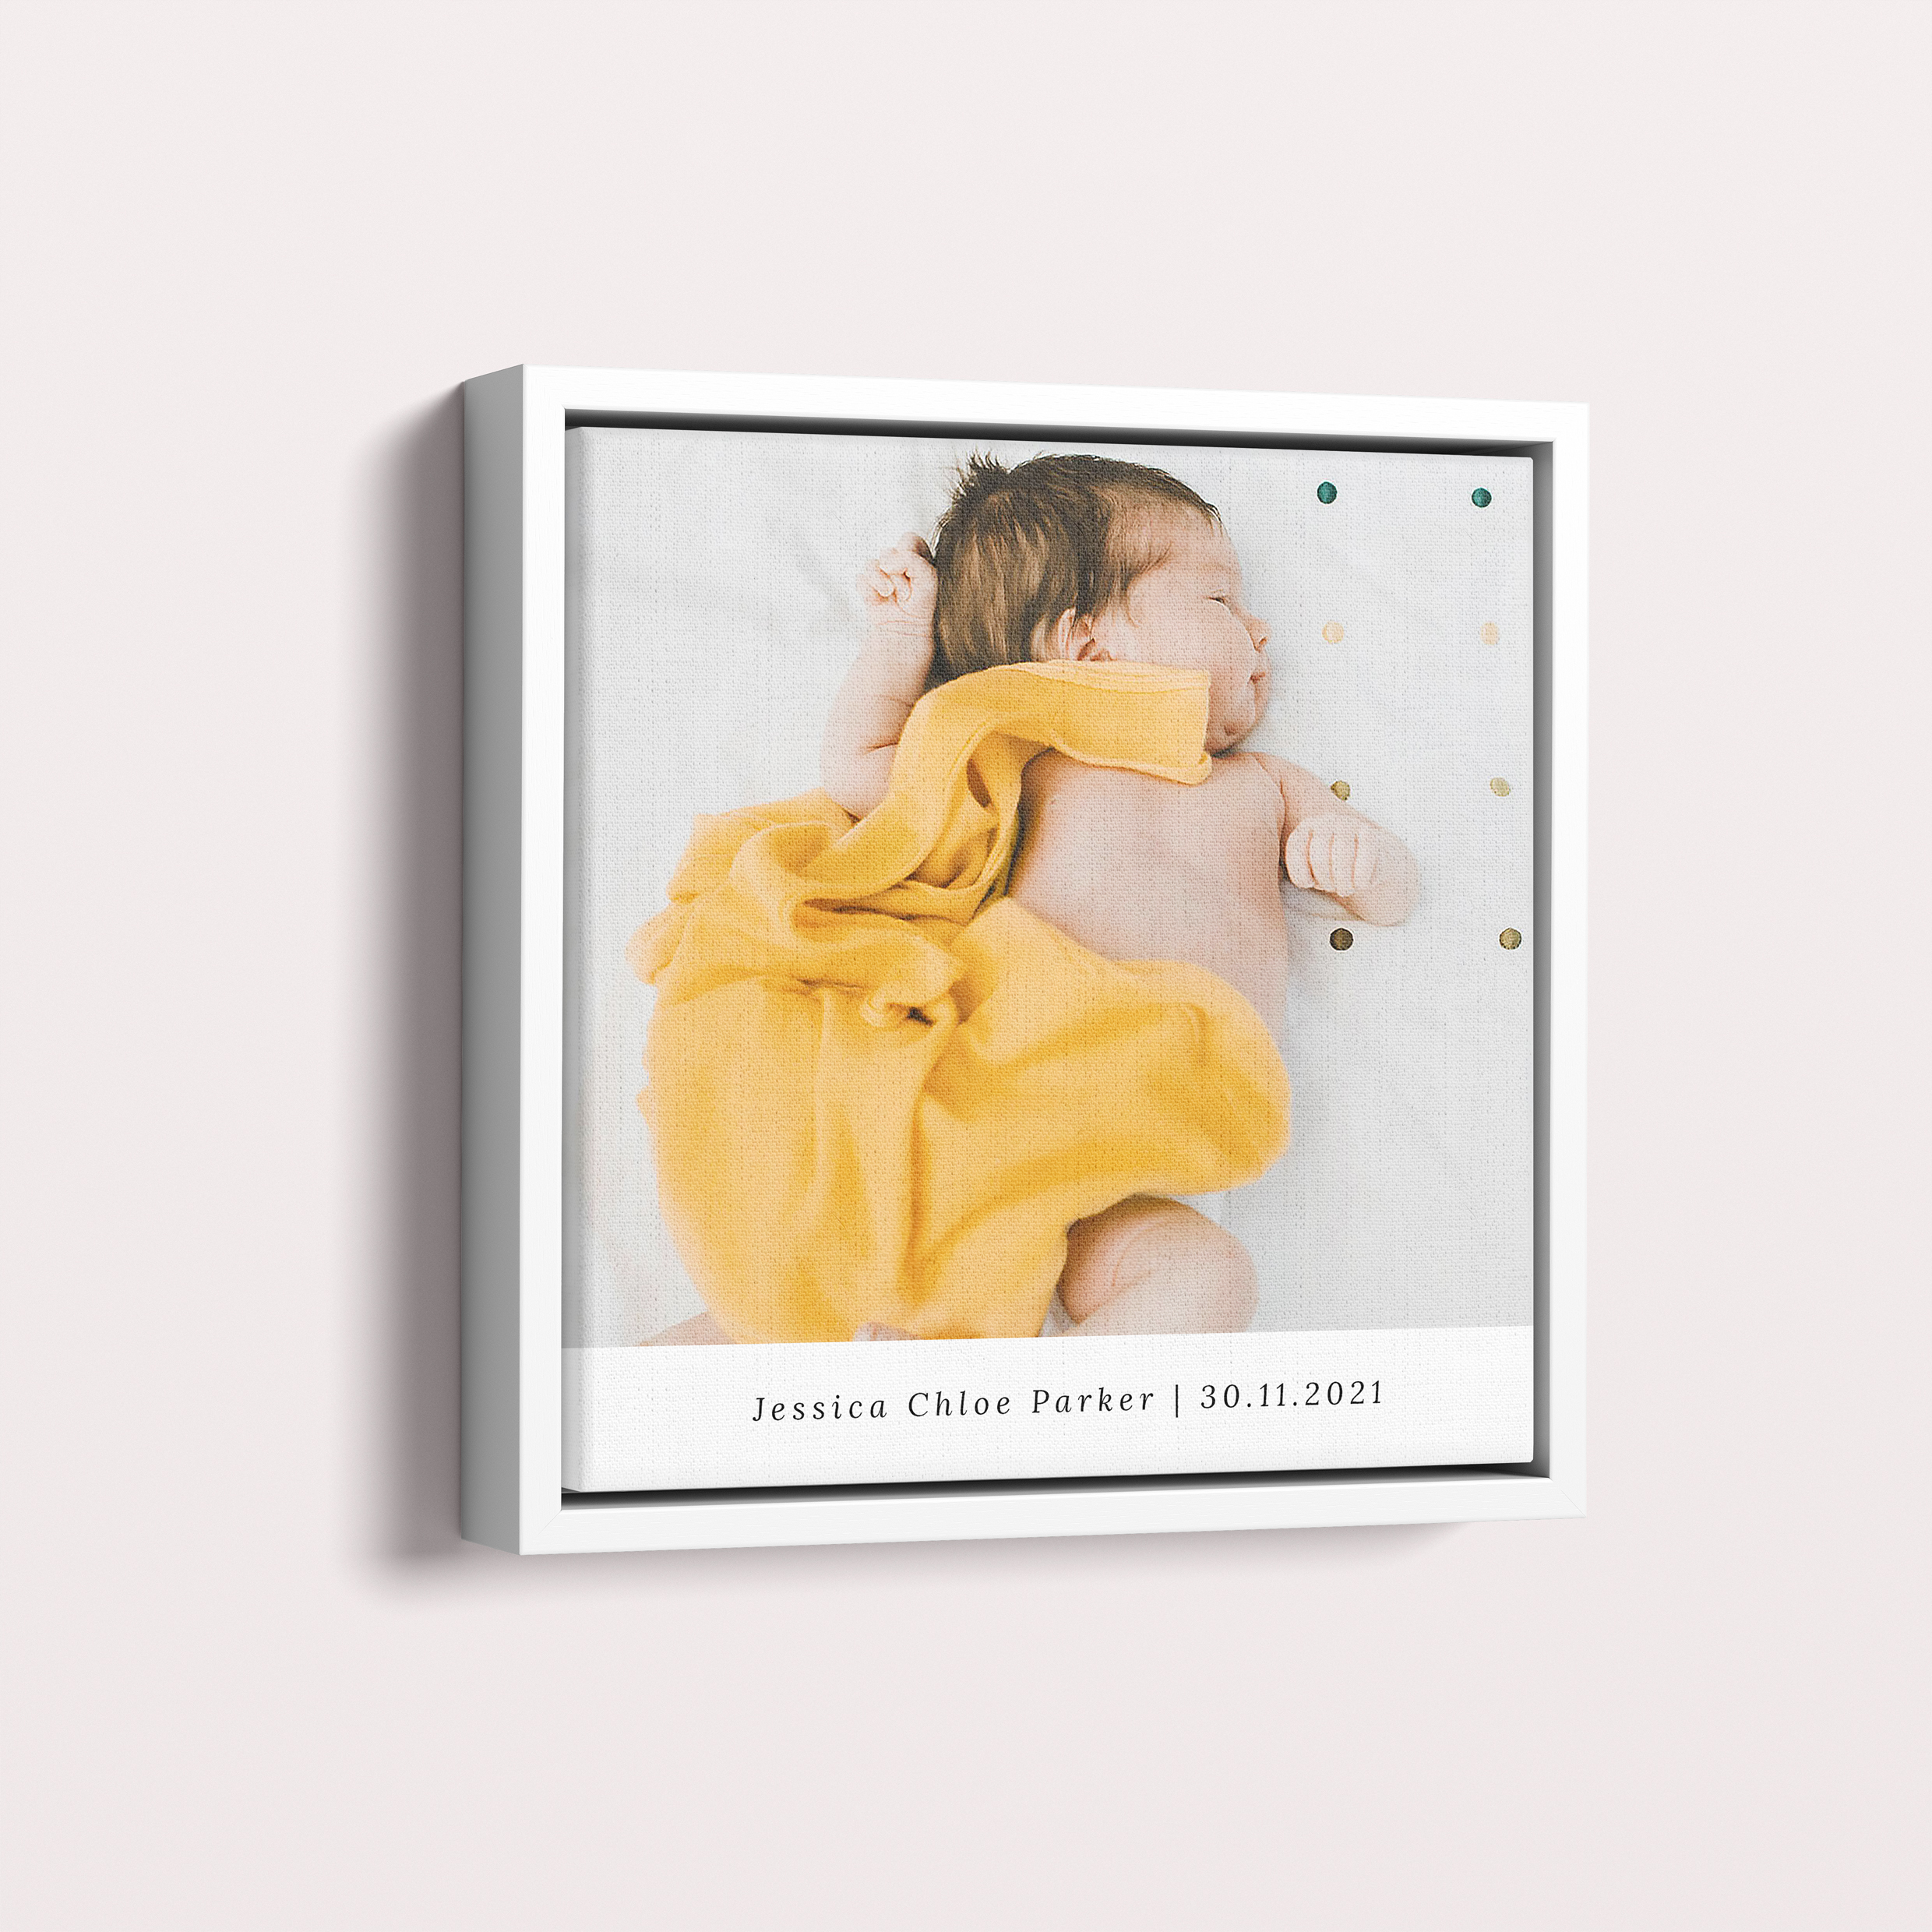  Personalized Framed Photo Canvases with Baby's Day Out Design – Capture Joyful Moments in High-Resolution Detail